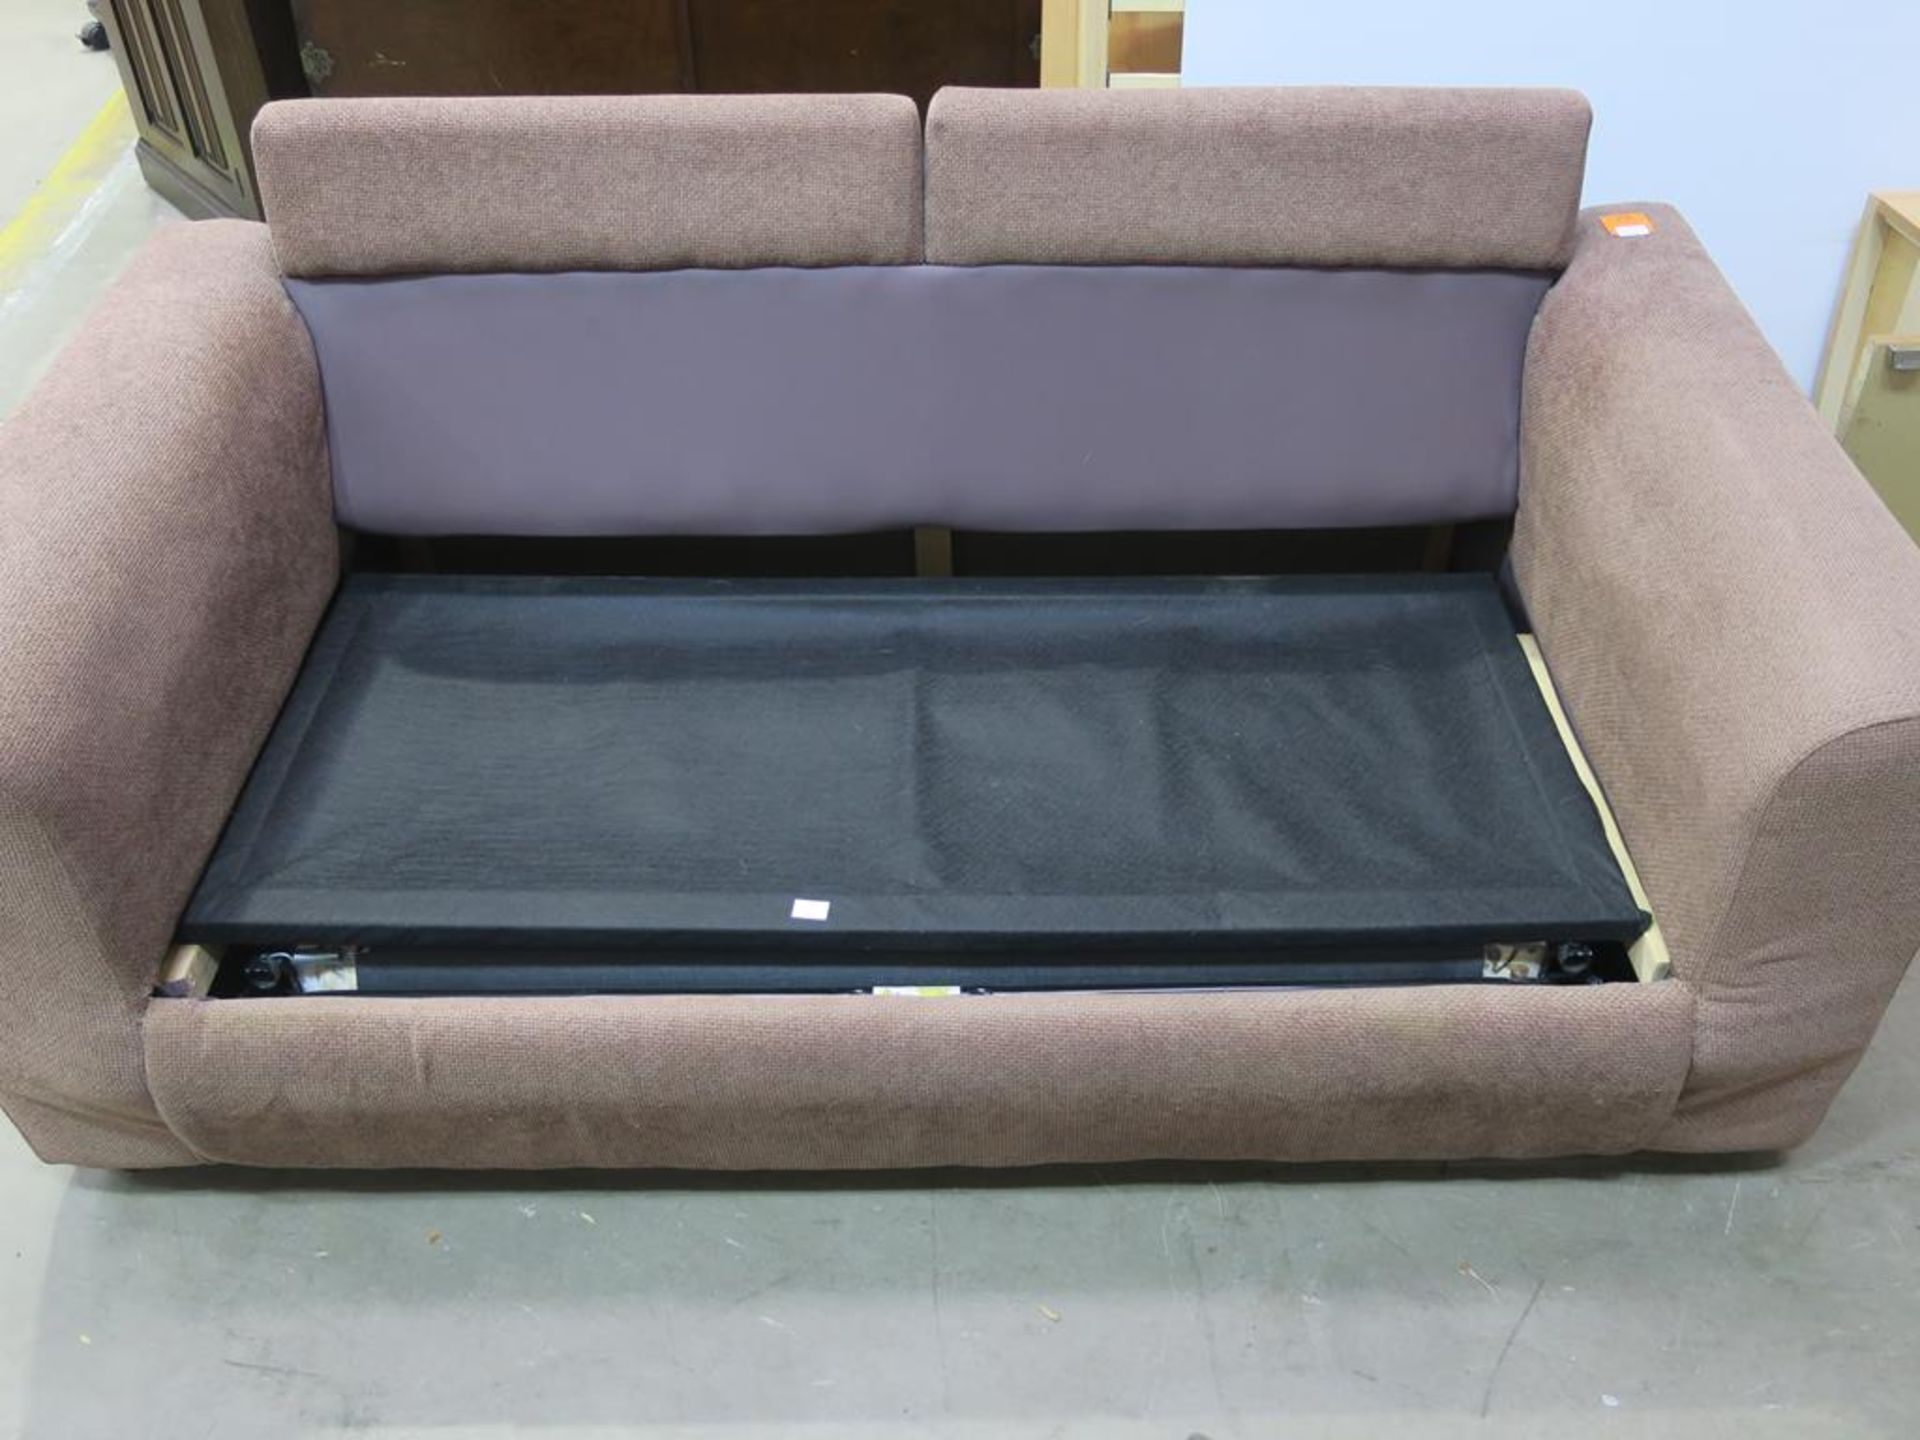 A two seater Bed Settee with a brown weave style upholstery (est £50-£100) - Image 2 of 10